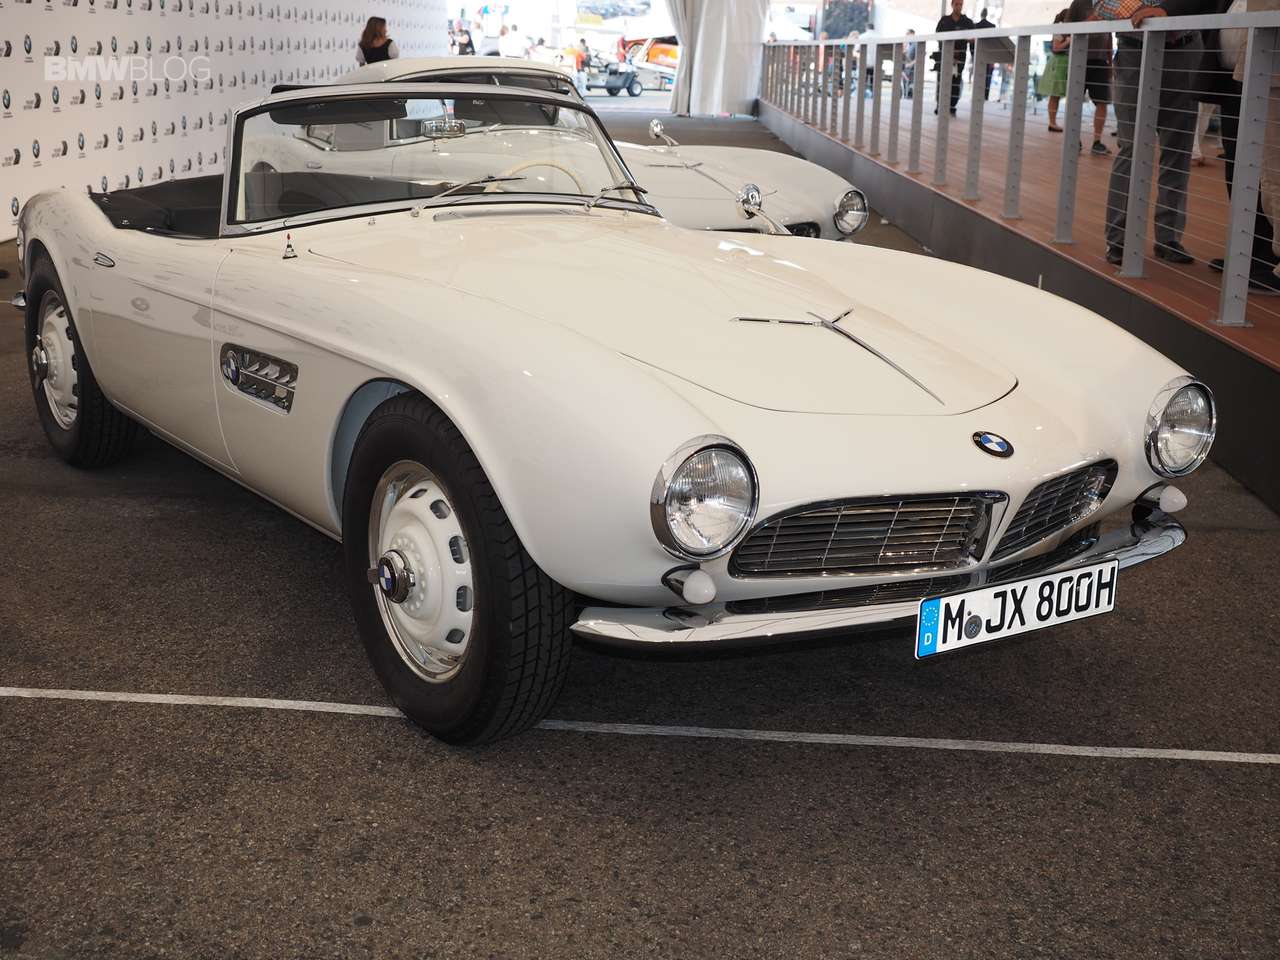 BMW 507 Roadster jigsaw puzzle online